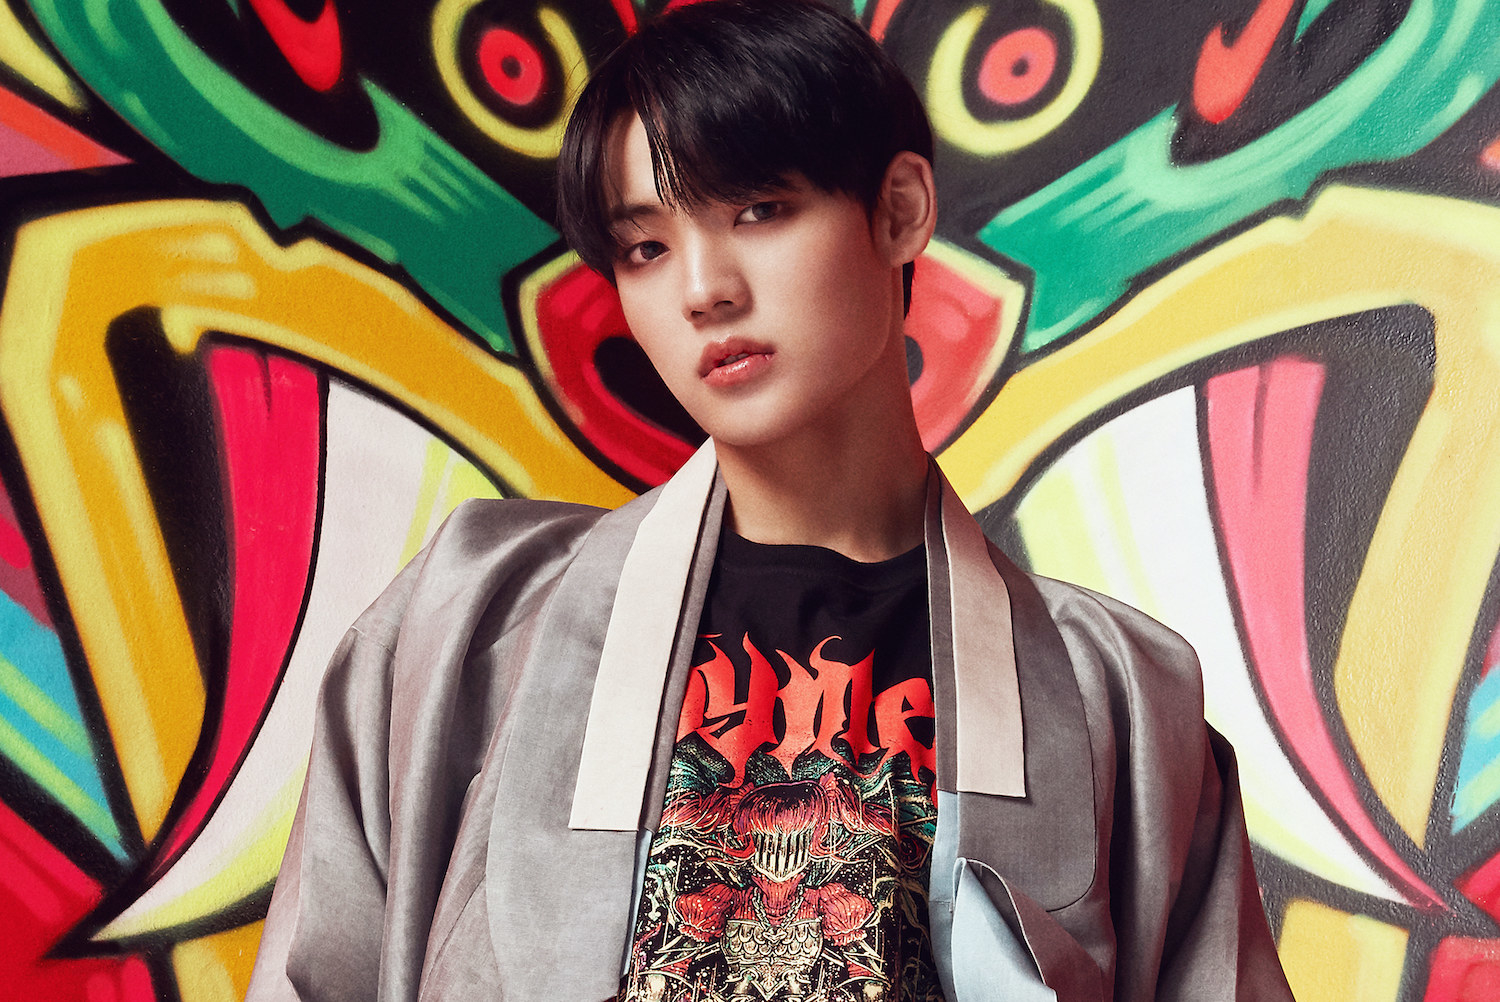 Chan wears a robe and a rock band t-shirt